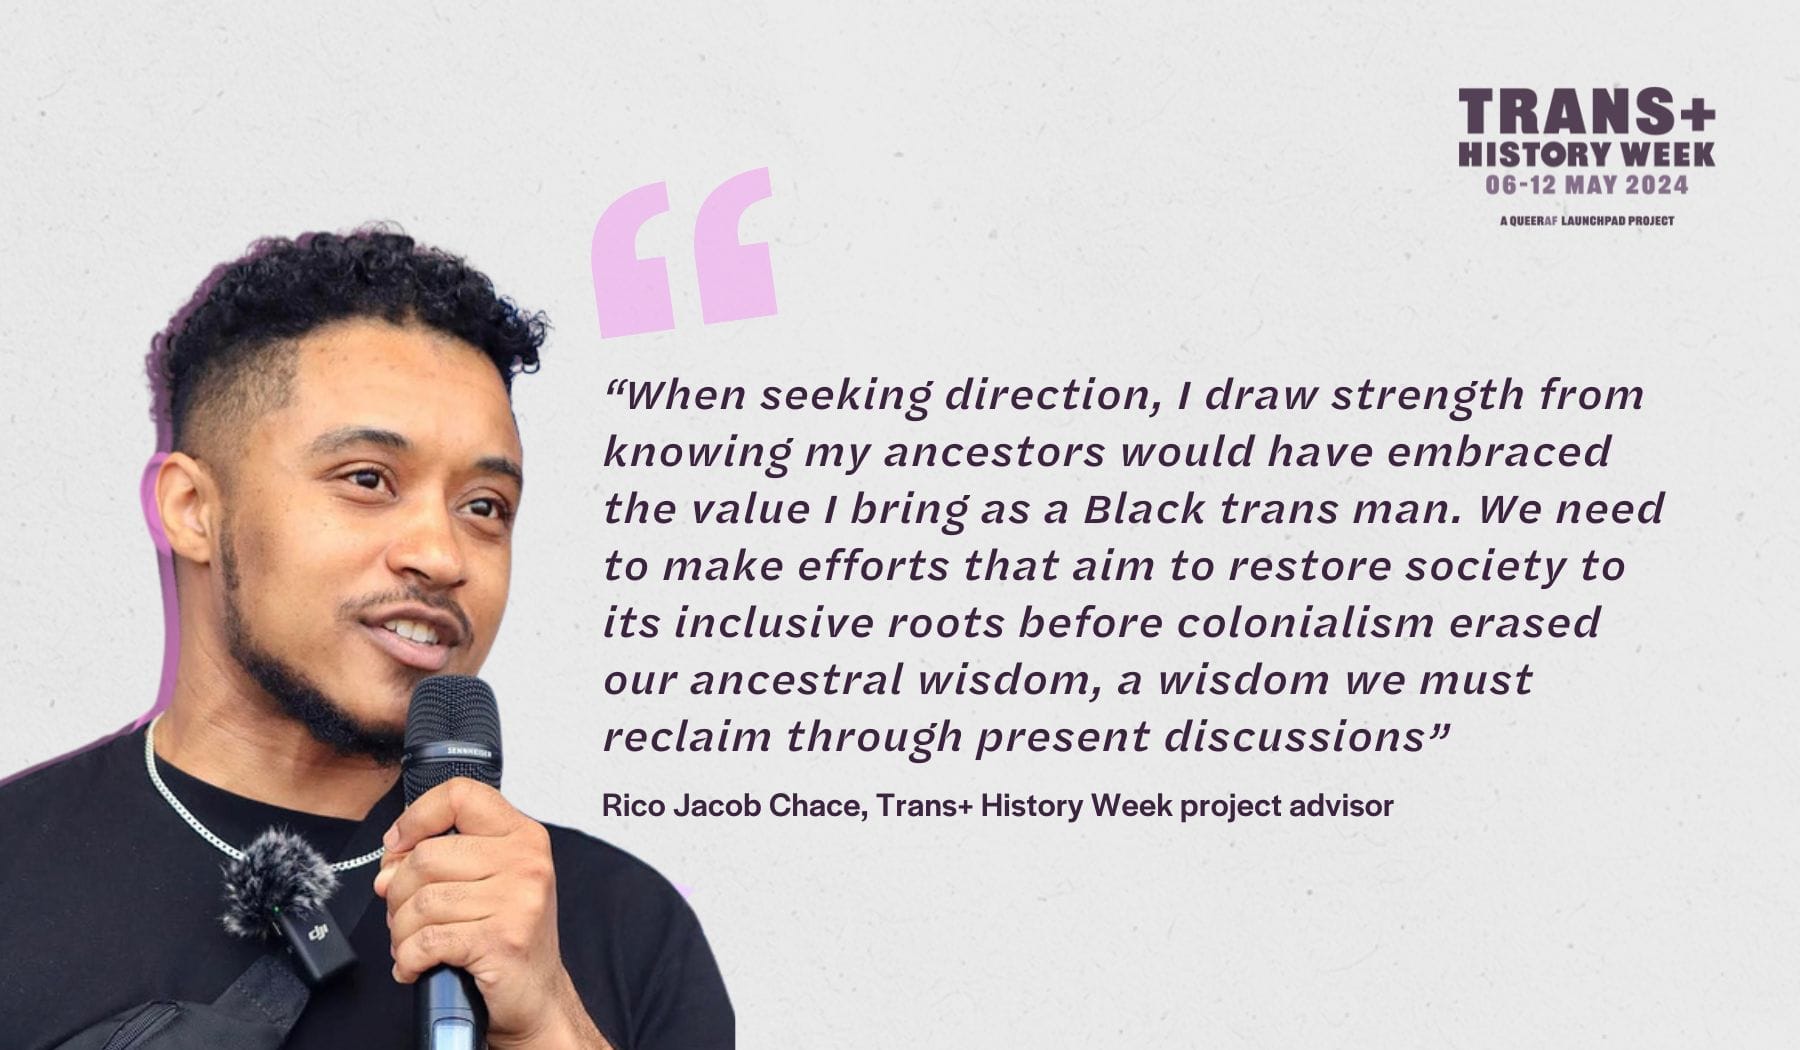 “When seeking direction, I draw strength from knowing my ancestors would have embraced the value I bring as a Black trans man. We need to make efforts that aim to restore society to its inclusive roots before colonialism erased our ancestral wisdom, a wisdom we must reclaim through present discussions” Rico Chase, Trans+ History Week project advisor